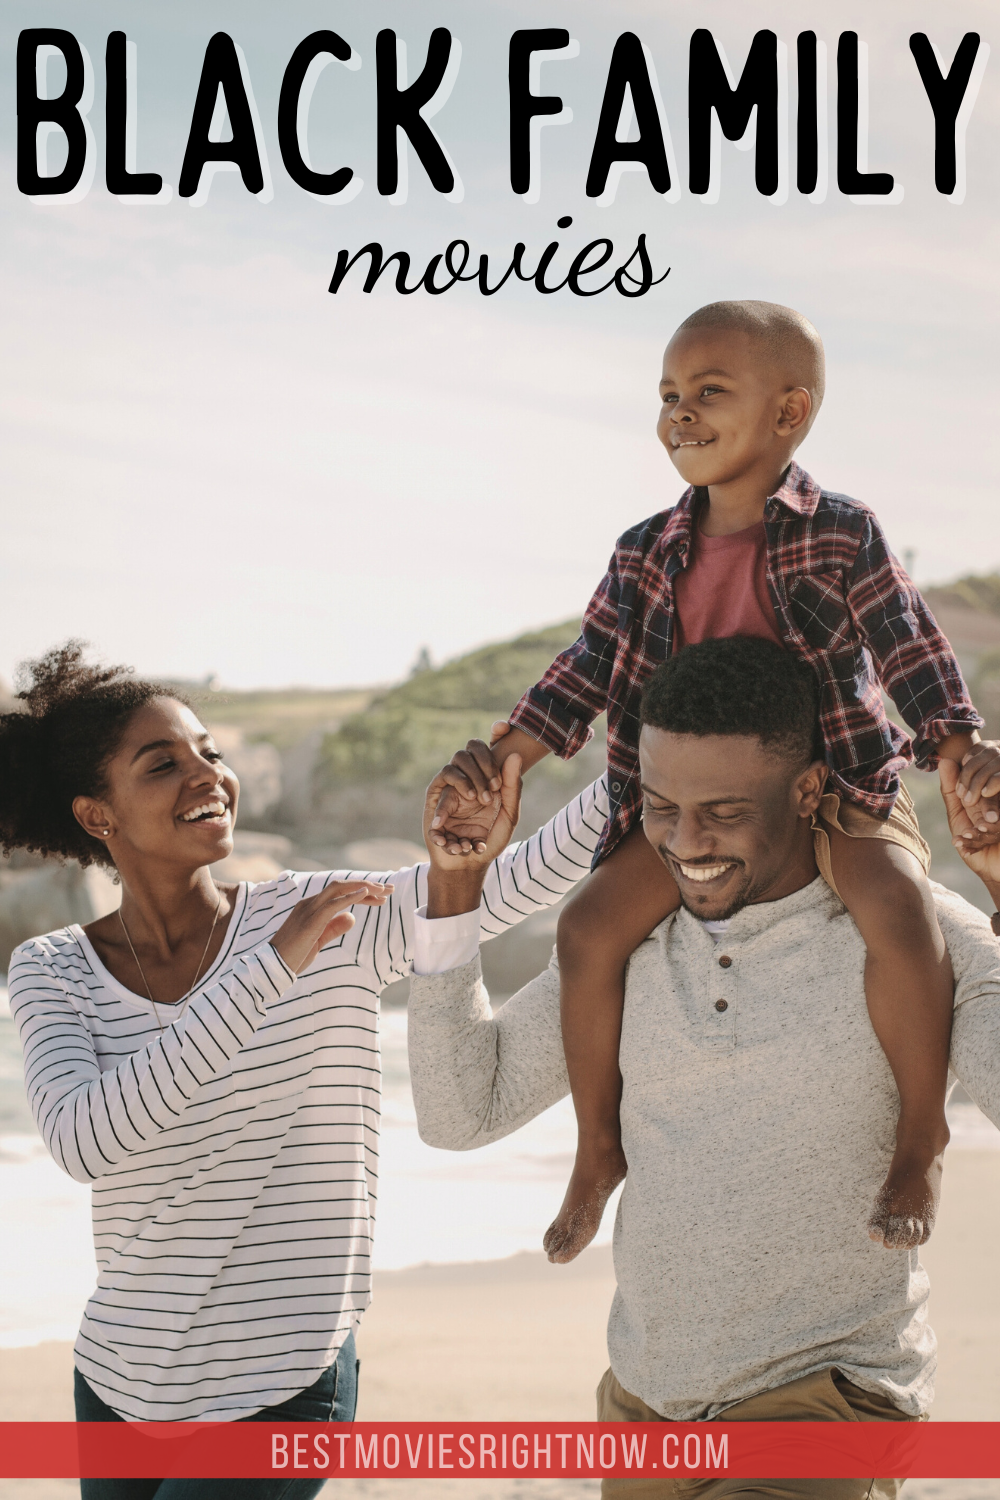 Black Family movies pin sized image with text overlay